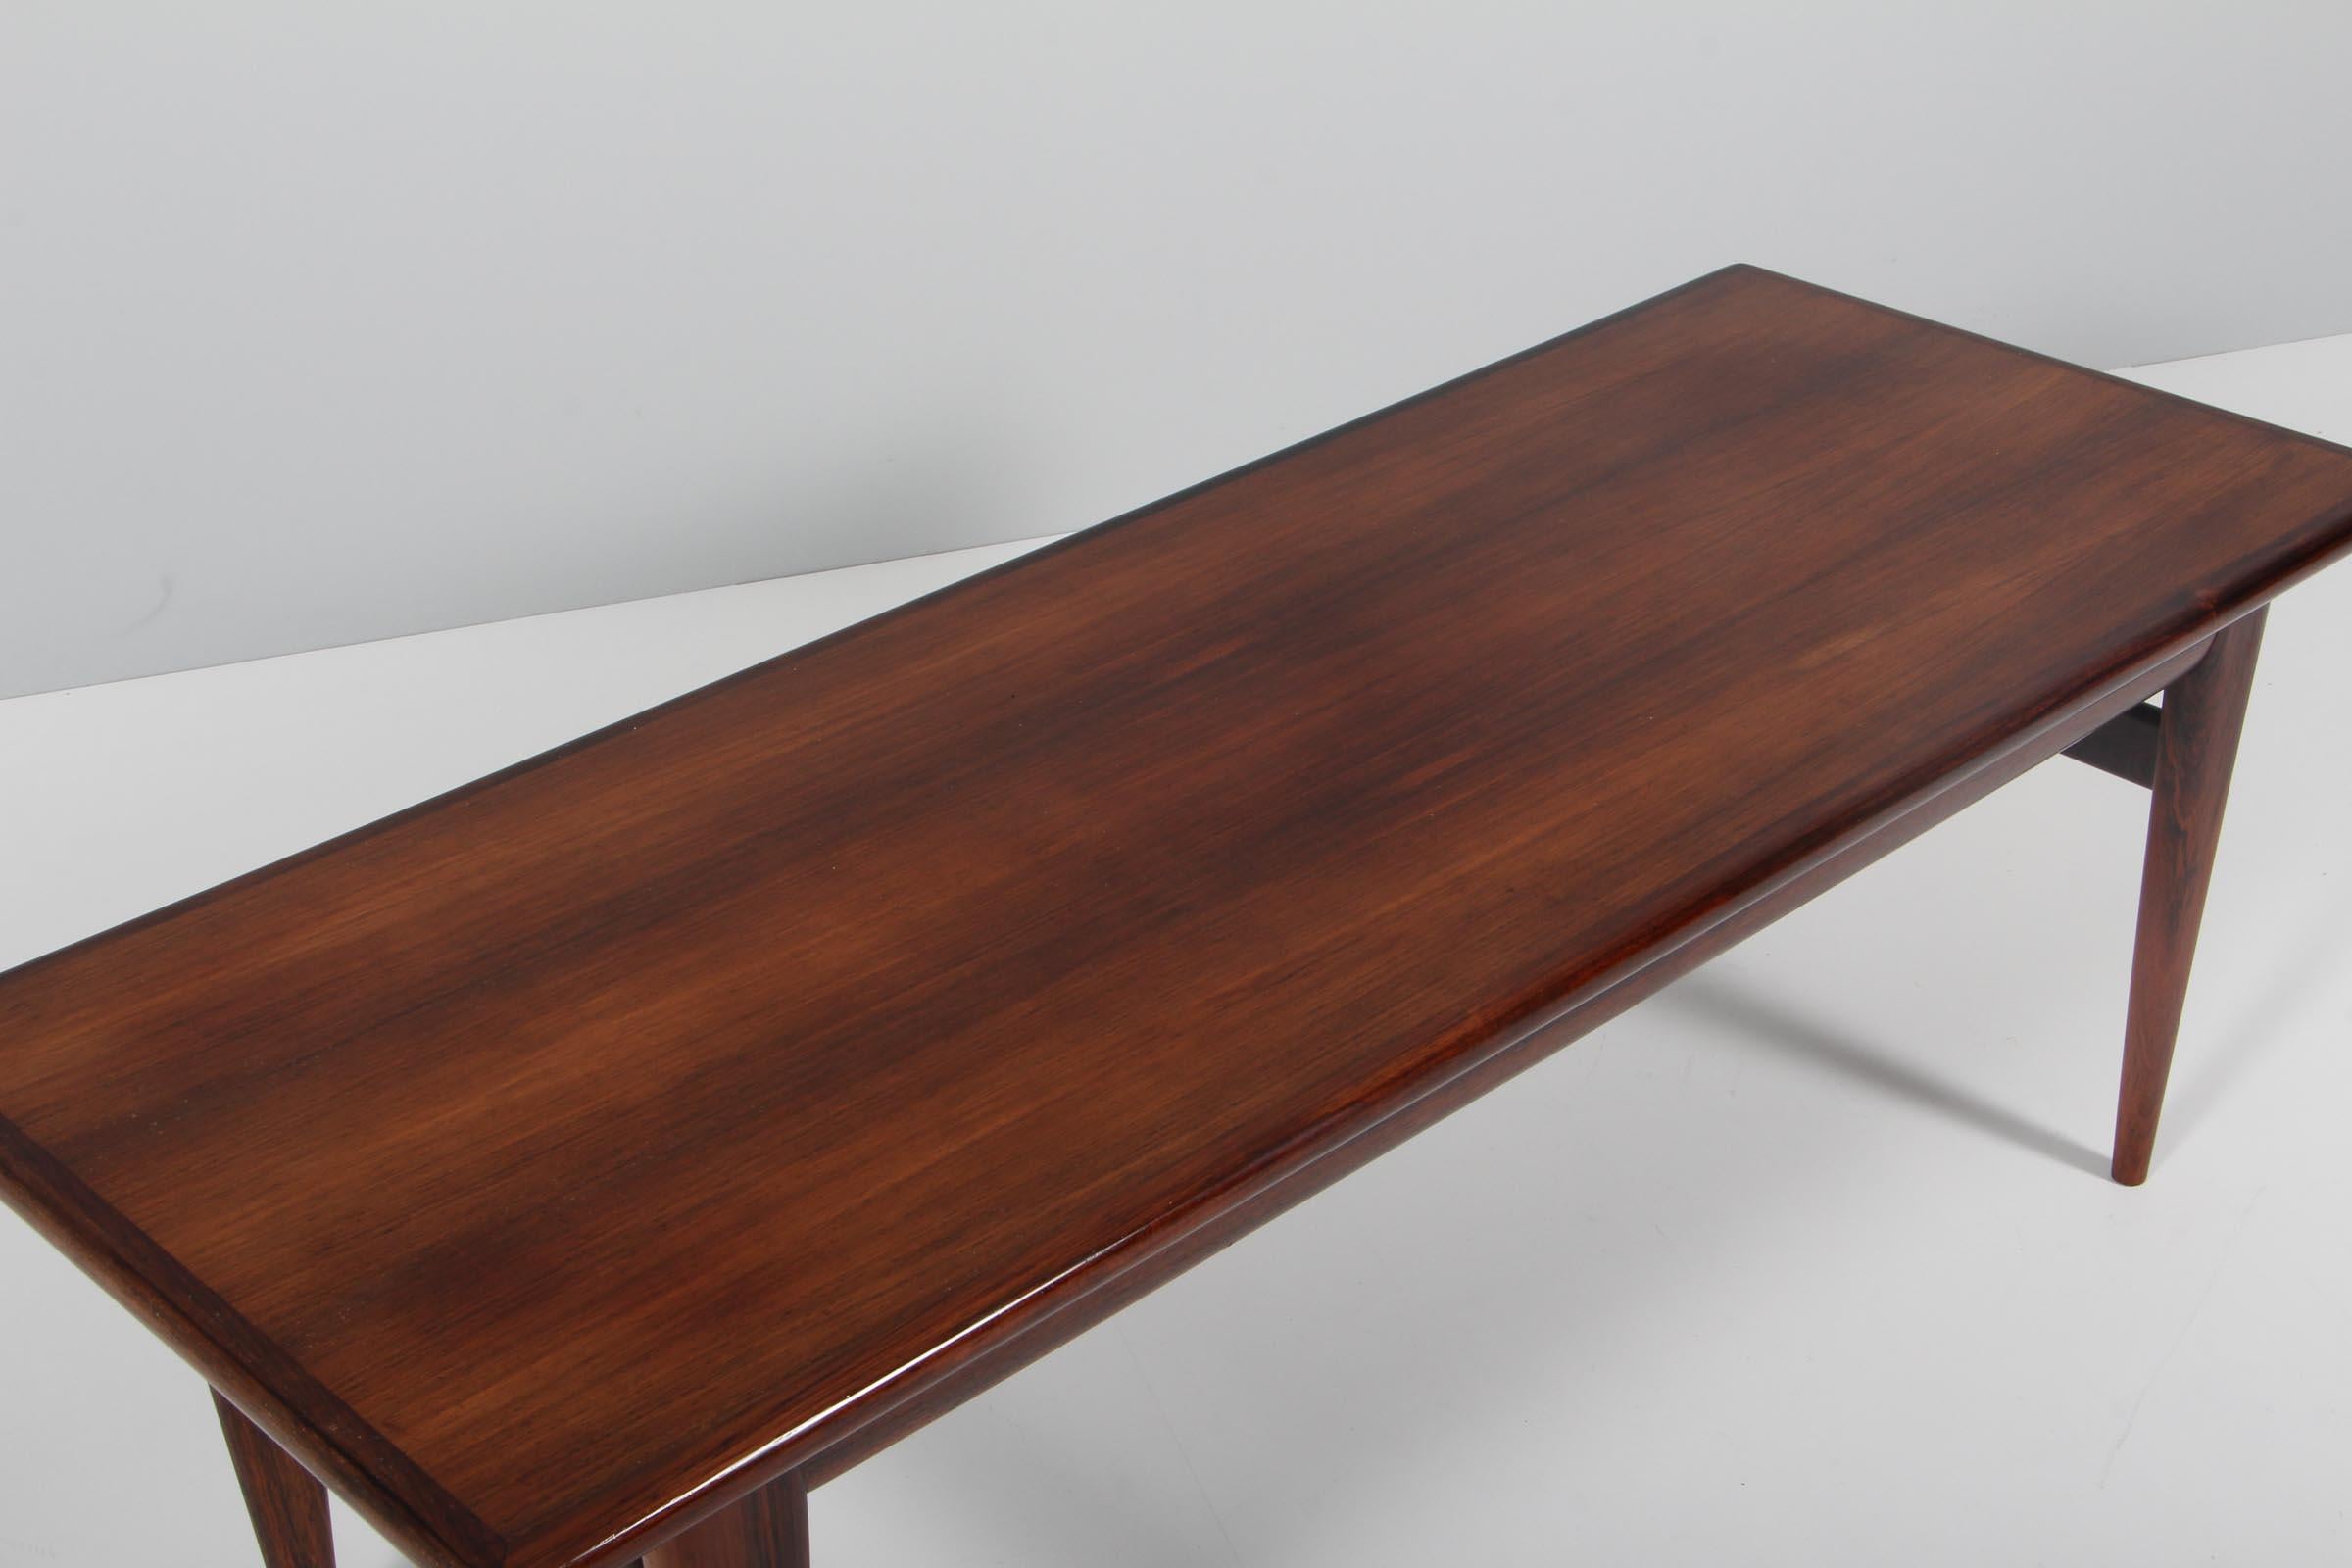 N. O. Møller coffee table in partly solid rosewood.

Made by J. L. Møller.